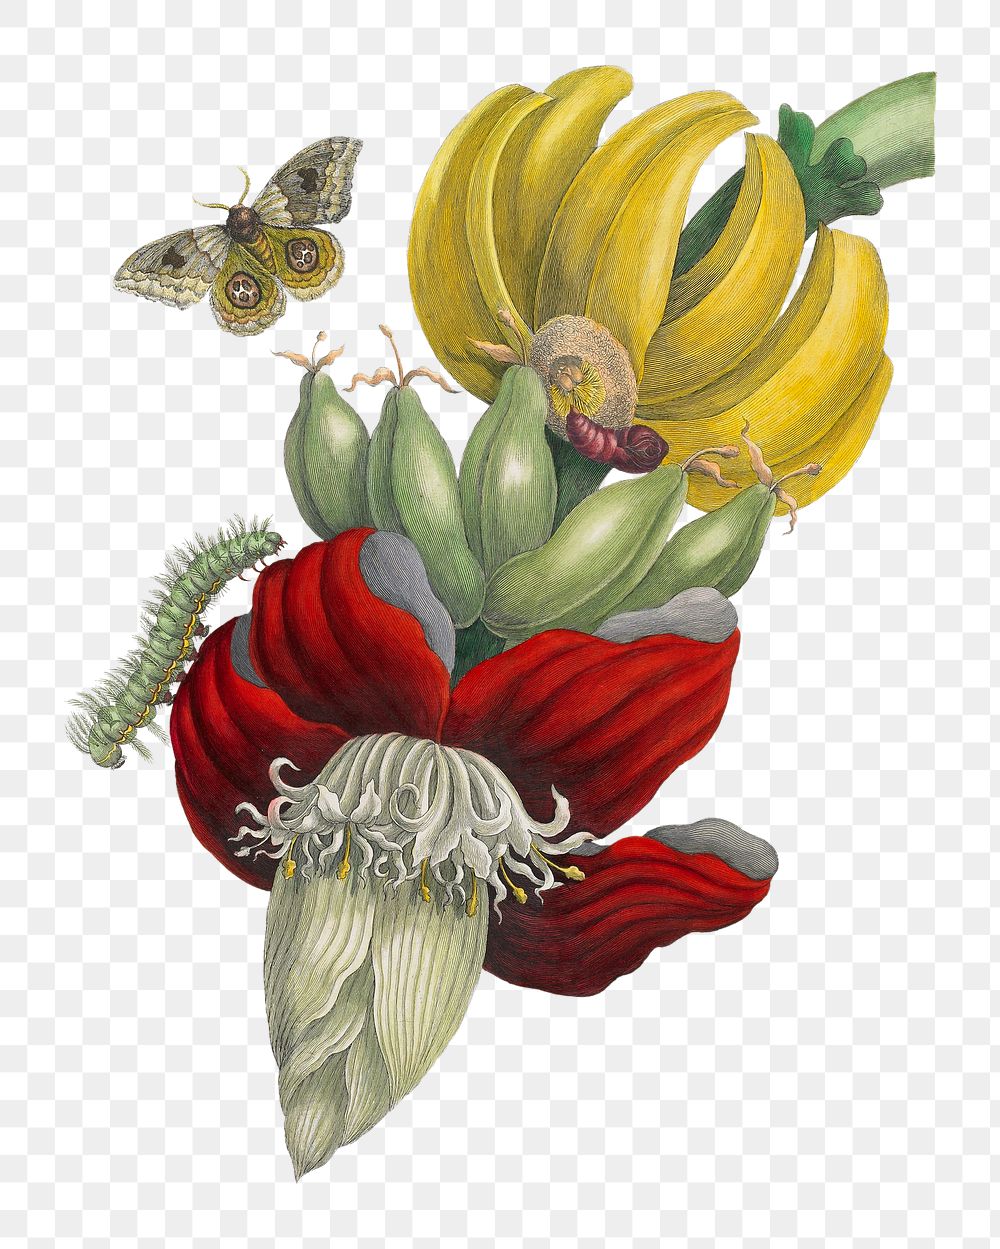 PNG Inflorescence of Banana, vintage flower illustration after Maria Sibylla Merian, transparent background. Remixed by…